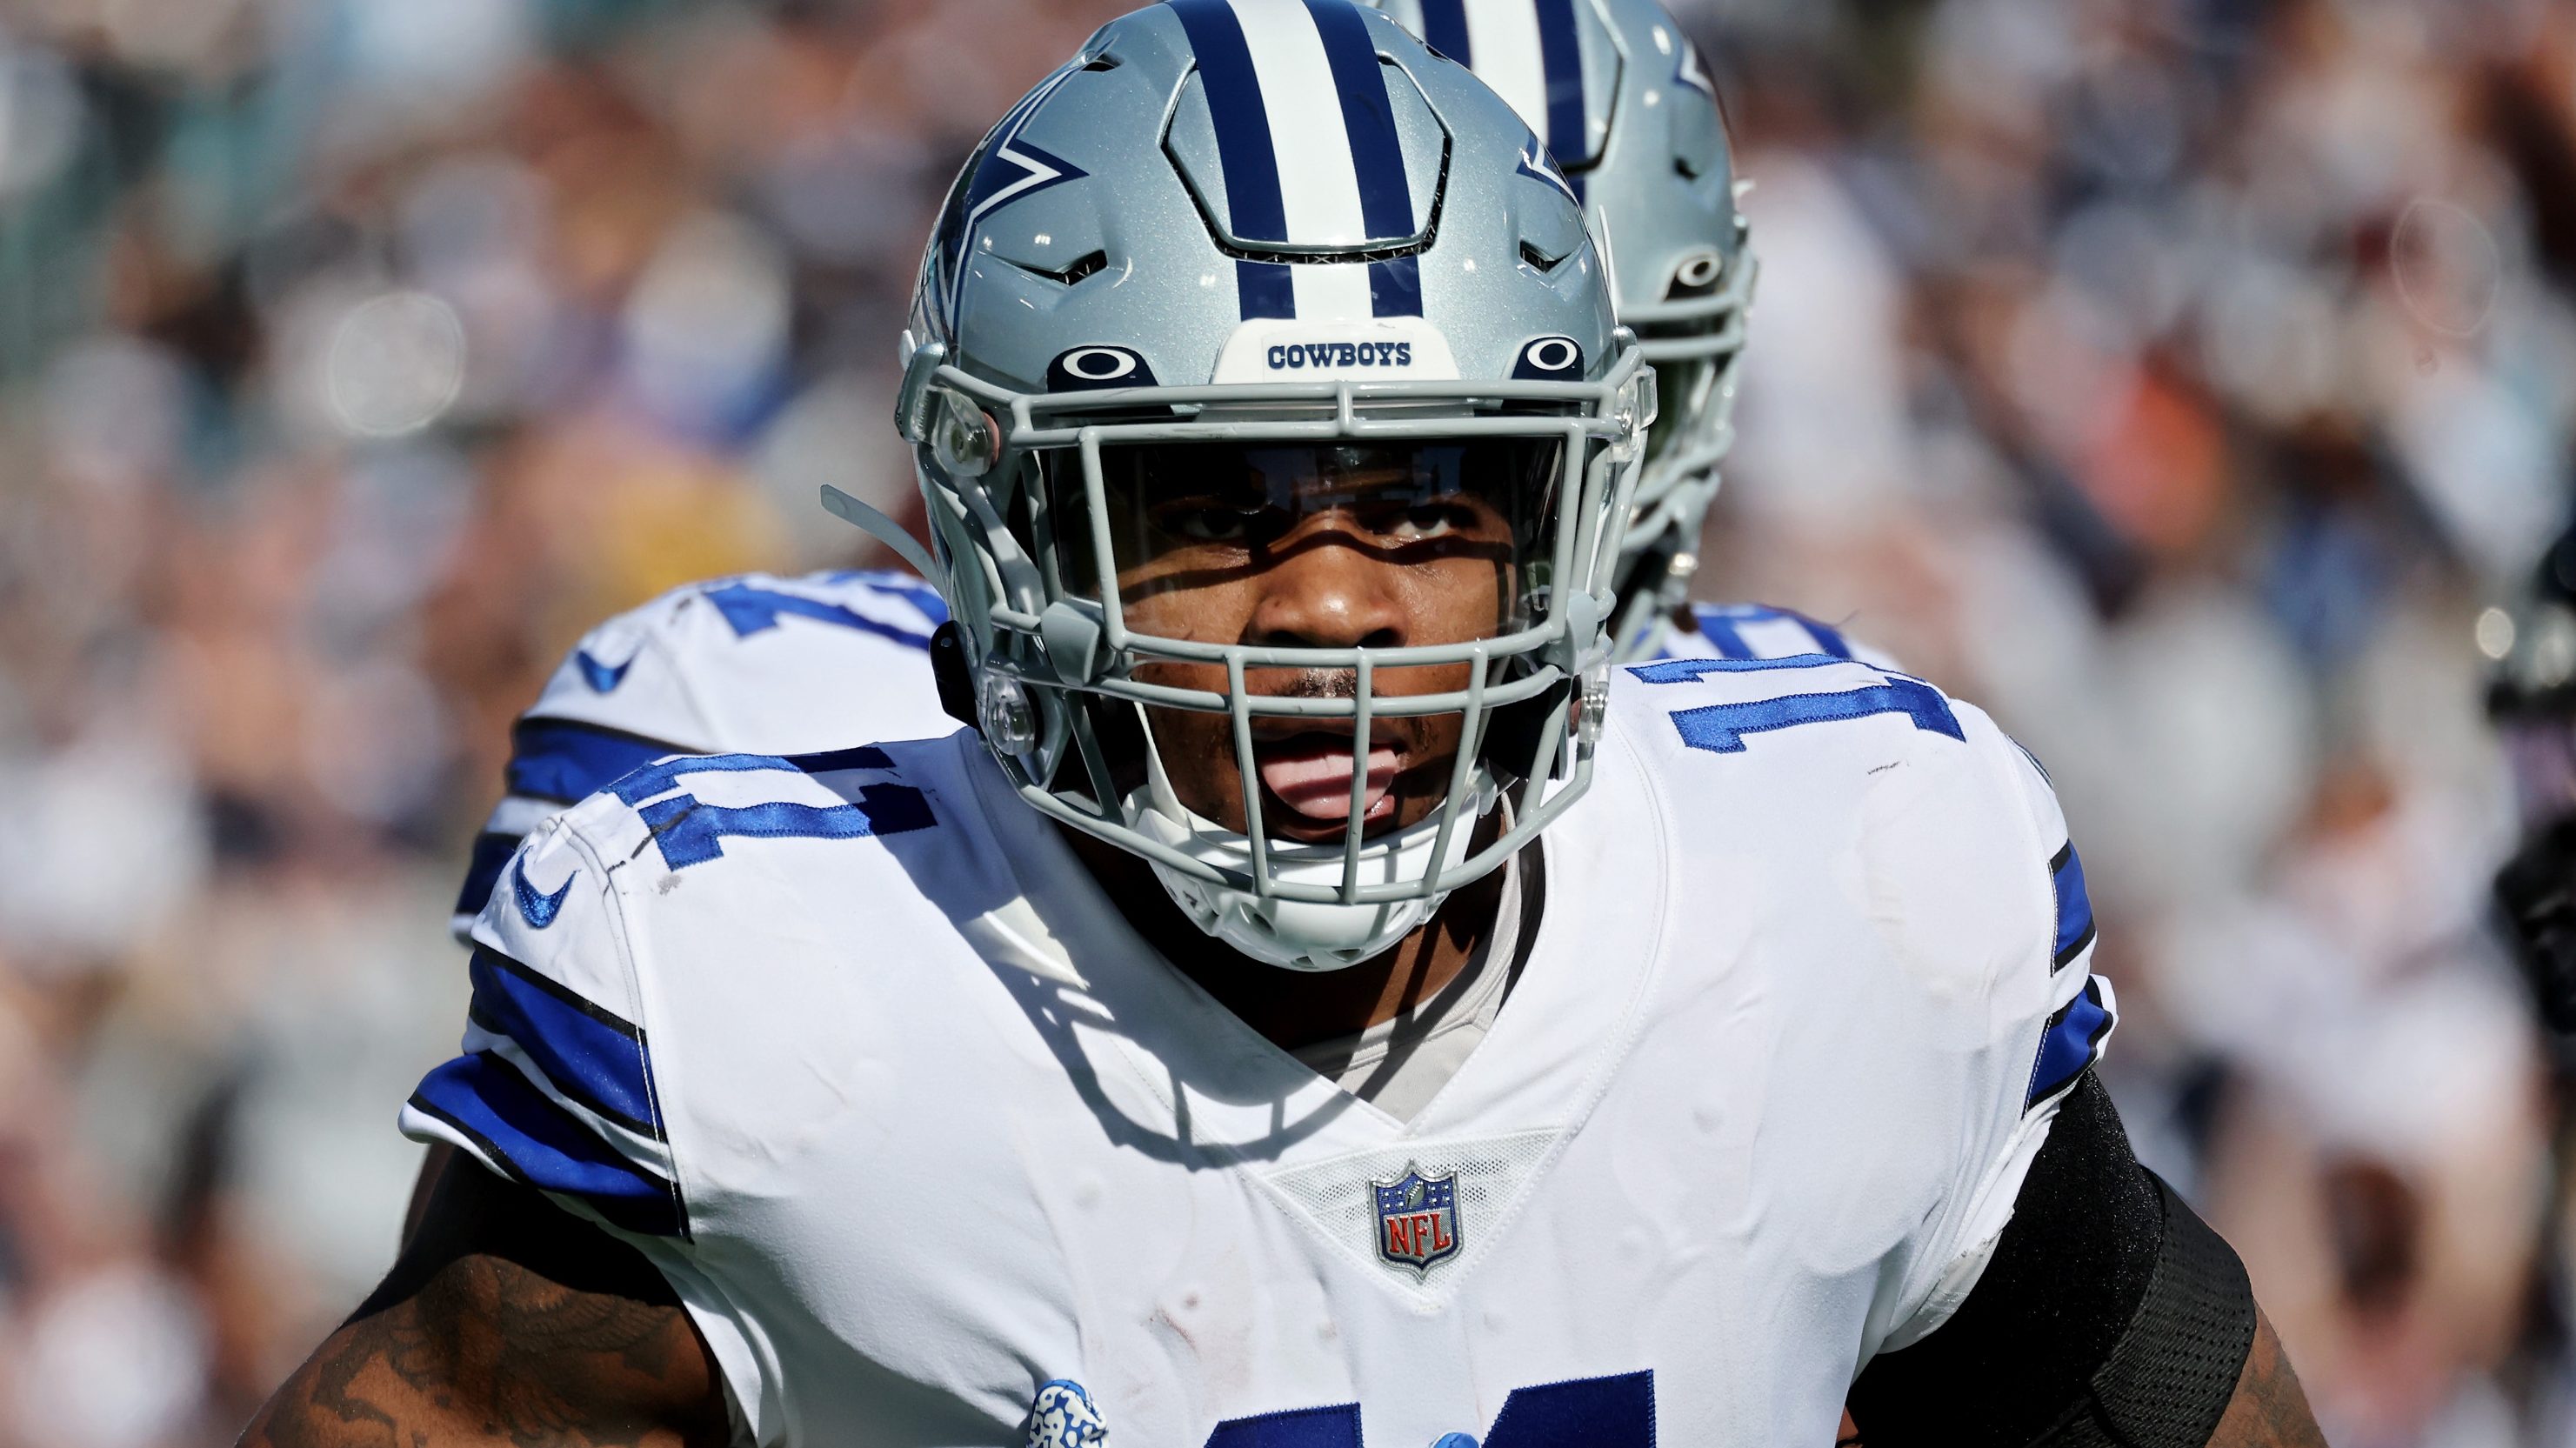 Agent 0 coming soon!': Cowboys' Micah Parsons tweets desire to